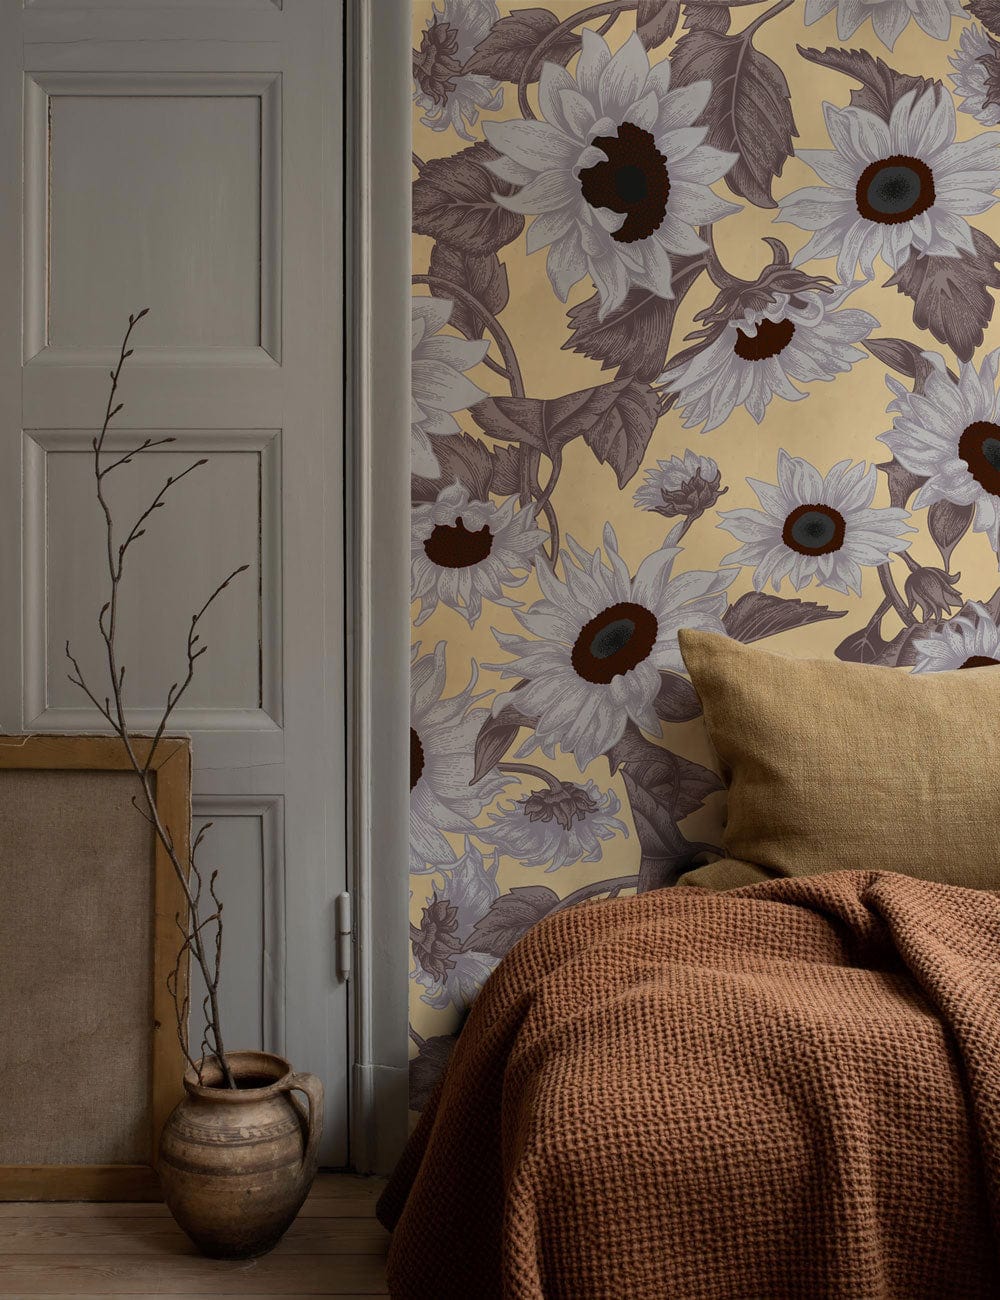 Wallpaper mural featuring grey daisies, perfect for decorating any room